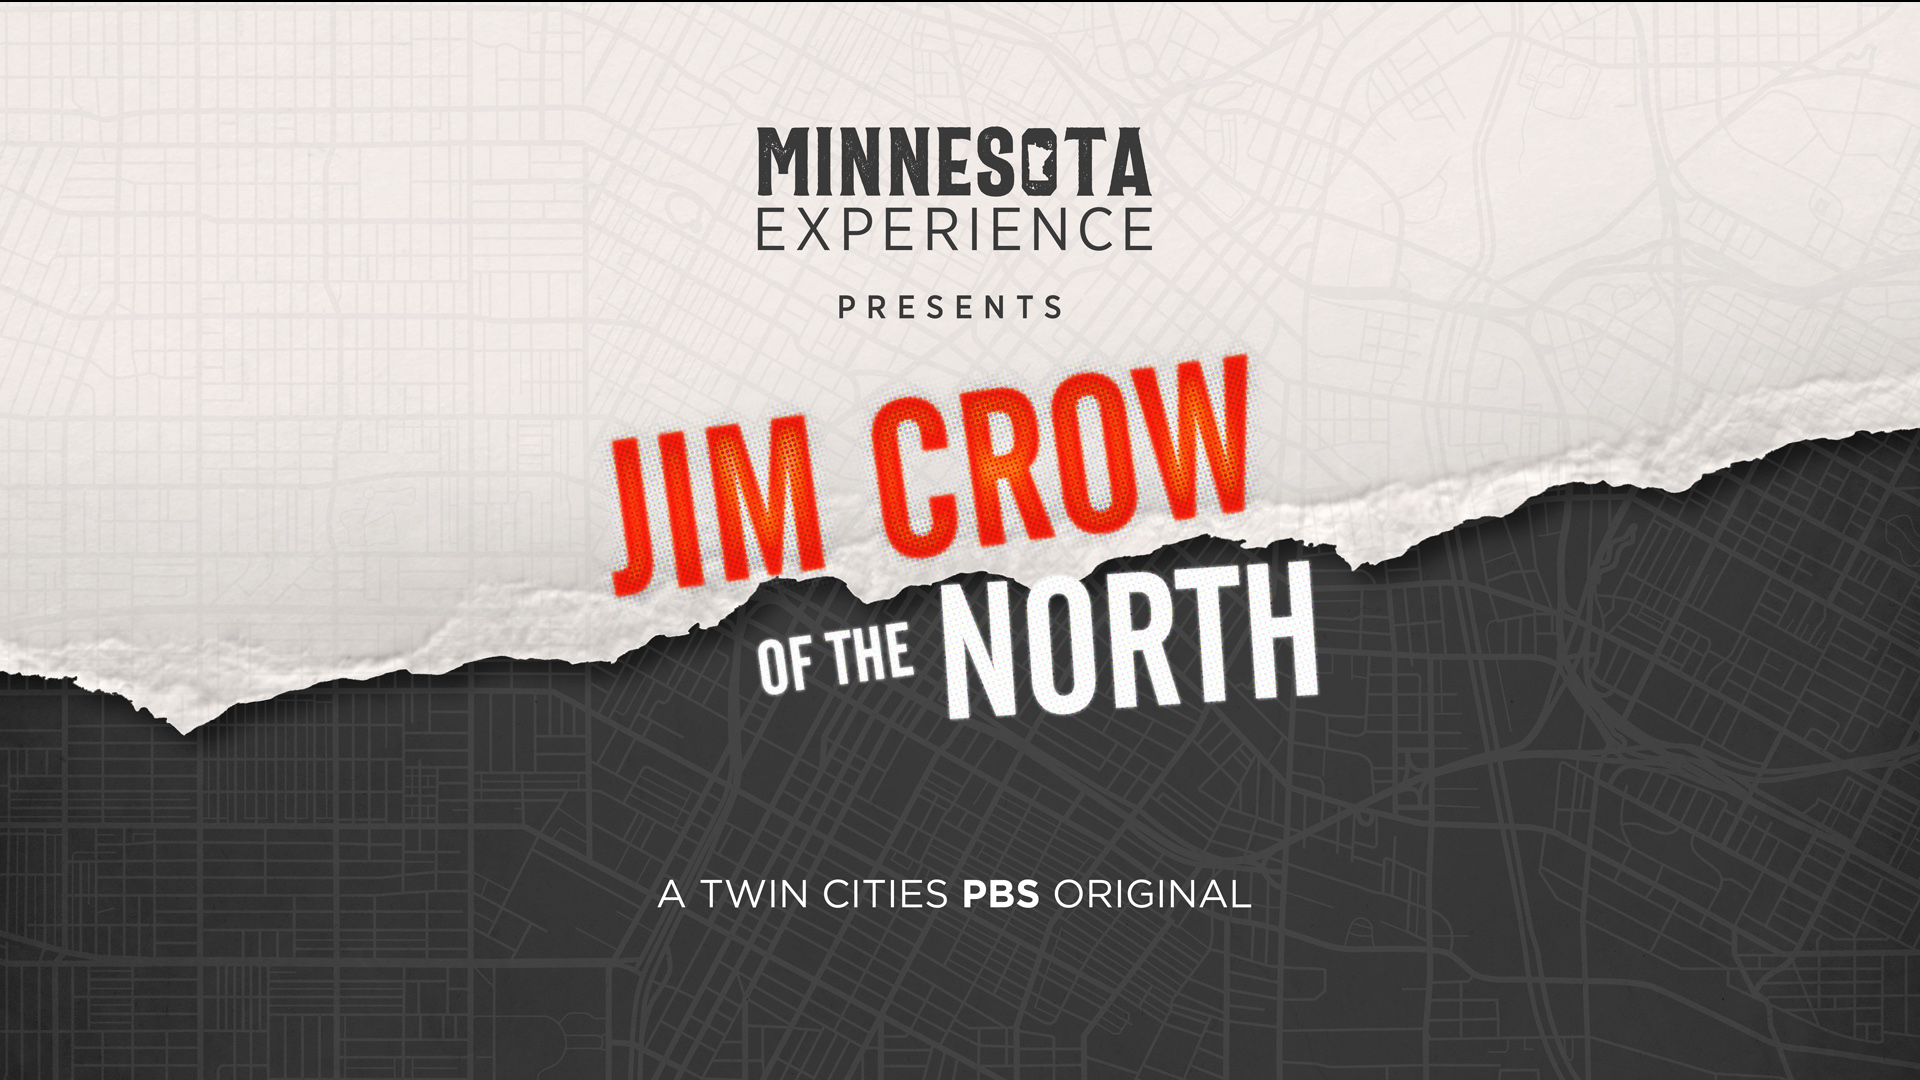 Minnesota Experience presents: Jim Crow of the North, a Twin Cities PBS Original